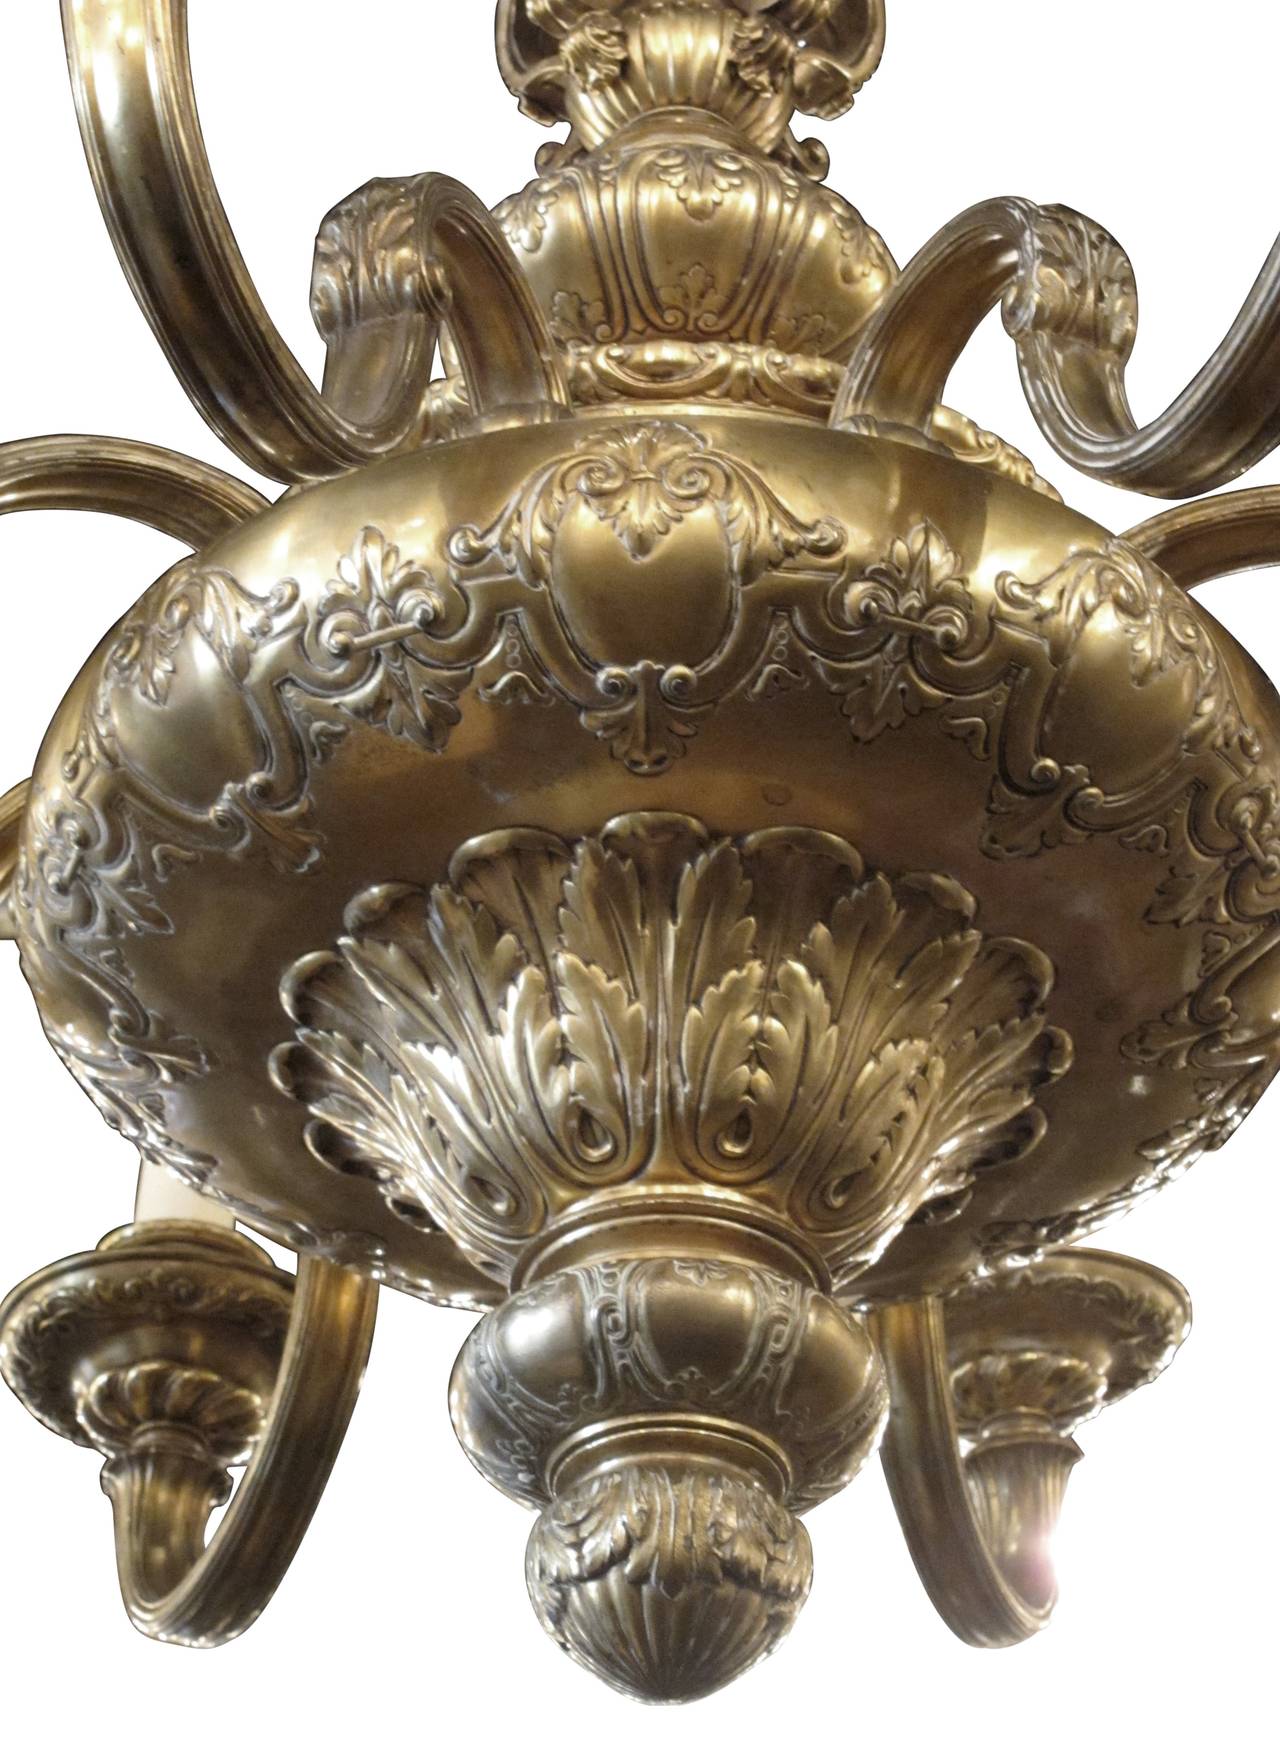 Gold Plate 1900s French Made Gold-Plated Eight-Arm Chandelier with Cherub Relief Work